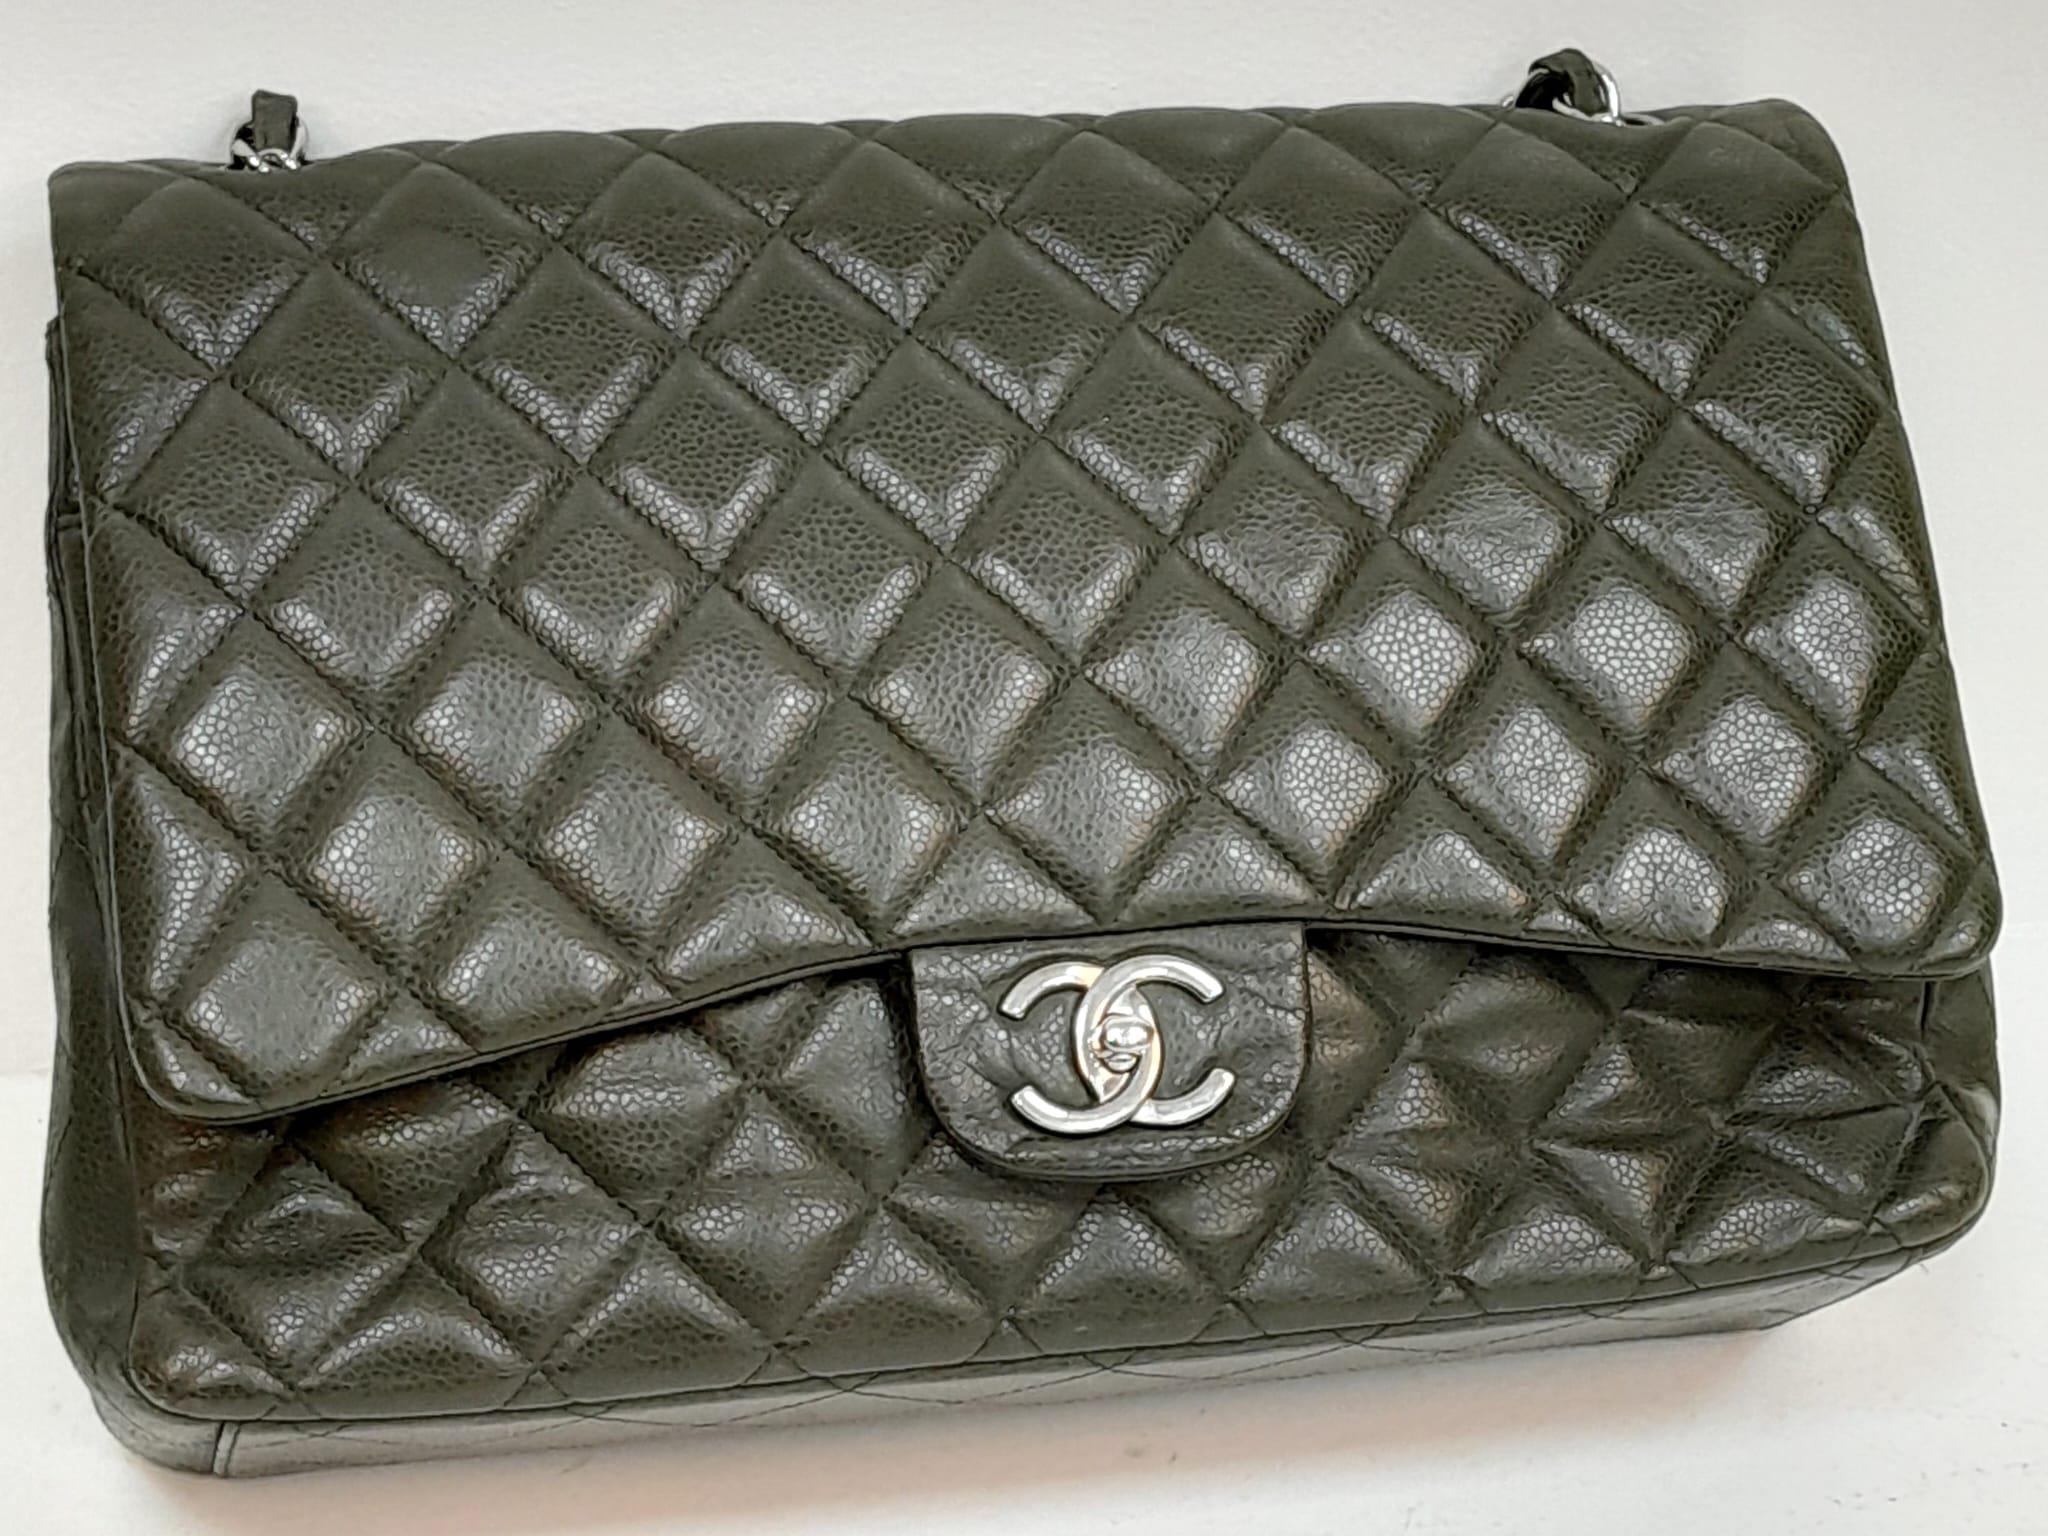 A Chanel Green Jumbo Classic Double Flap Bag. Quilted leather exterior with silver-toned hardware, - Image 4 of 14